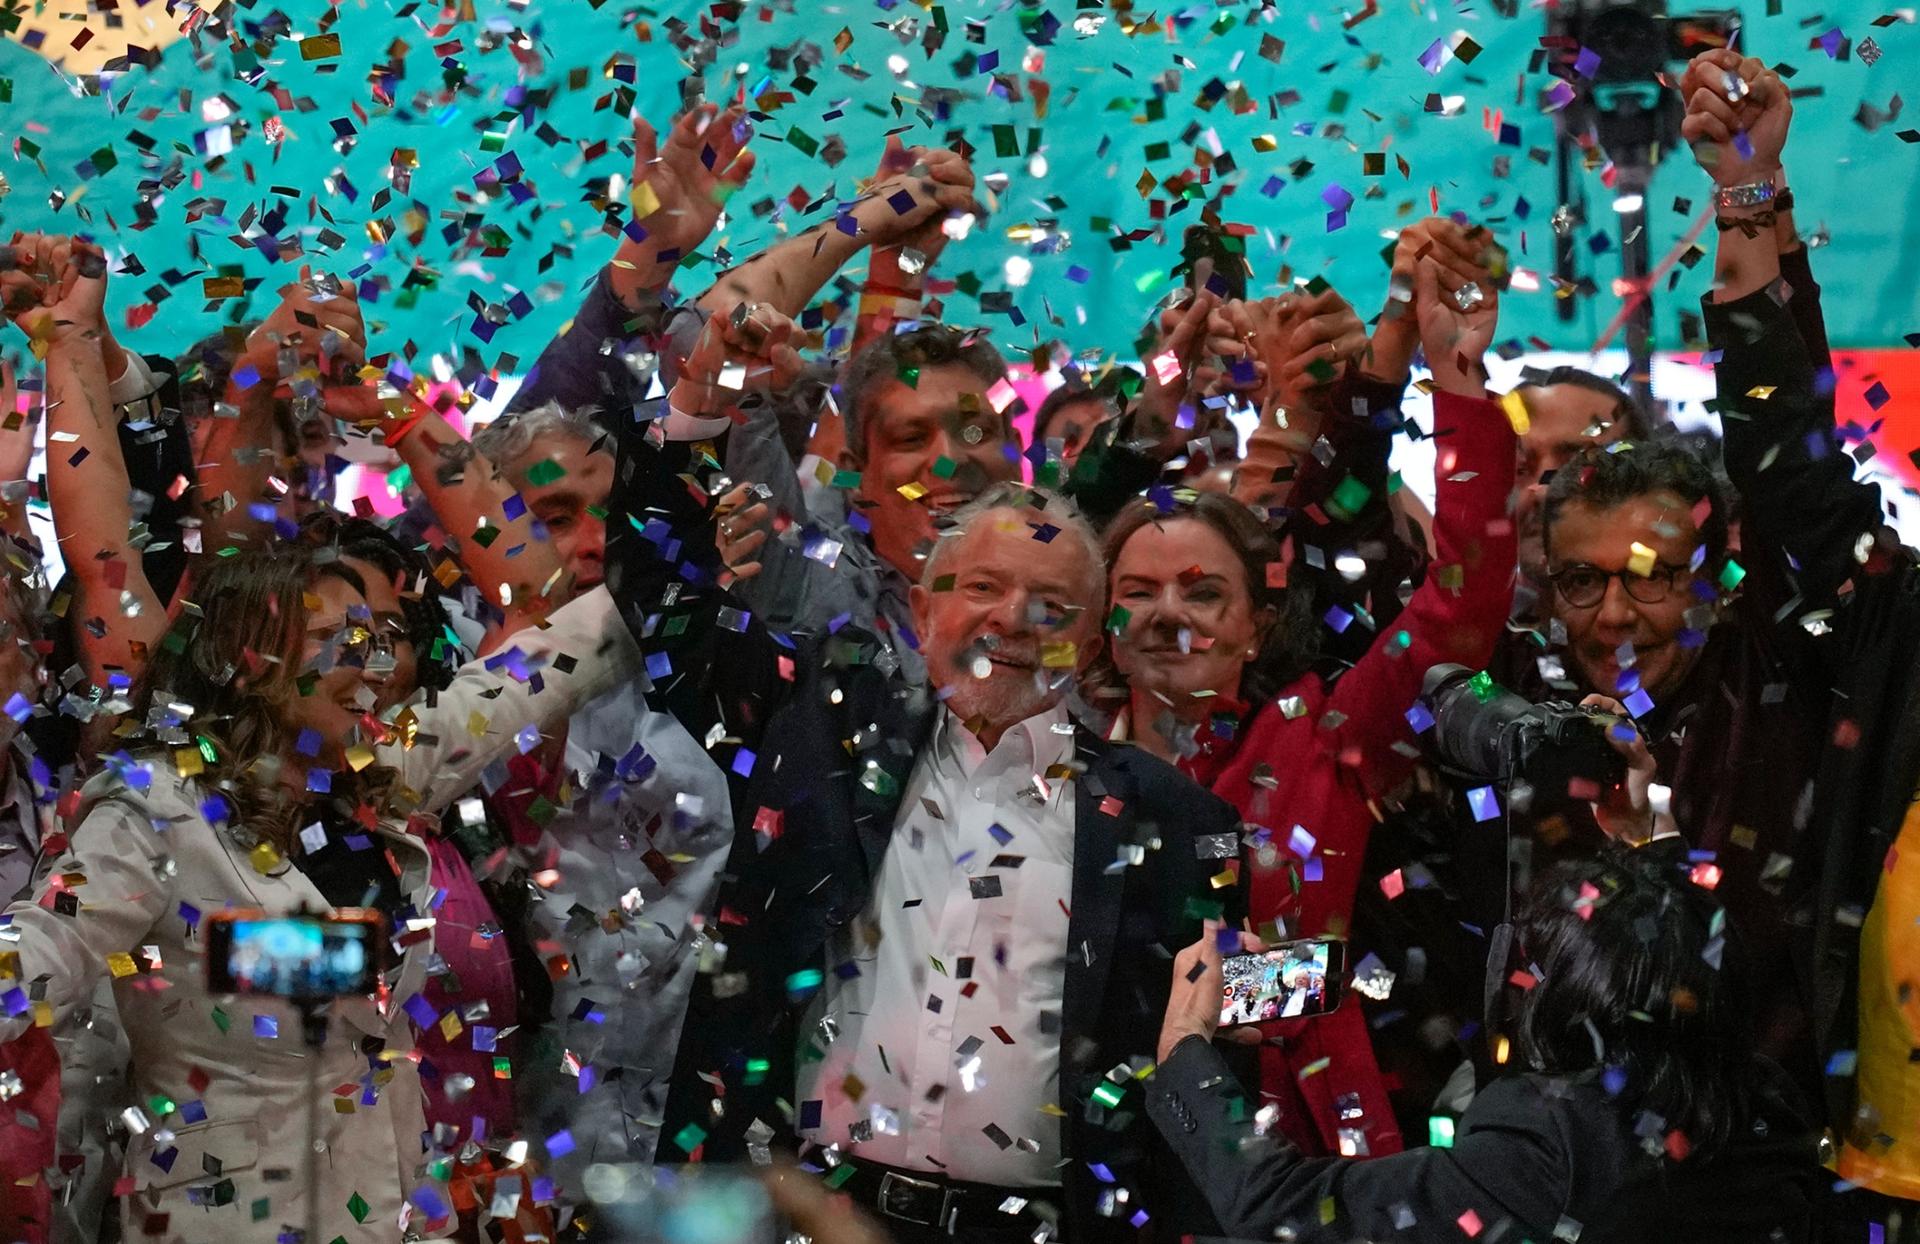 Confetti showers former Brazilian President Luiz Inácio Lula da Silva and supporters after the announcement of his candidacy for the country’s upcoming presidential election, in São Paulo, Brazil, Saturday, May 7, 2022.